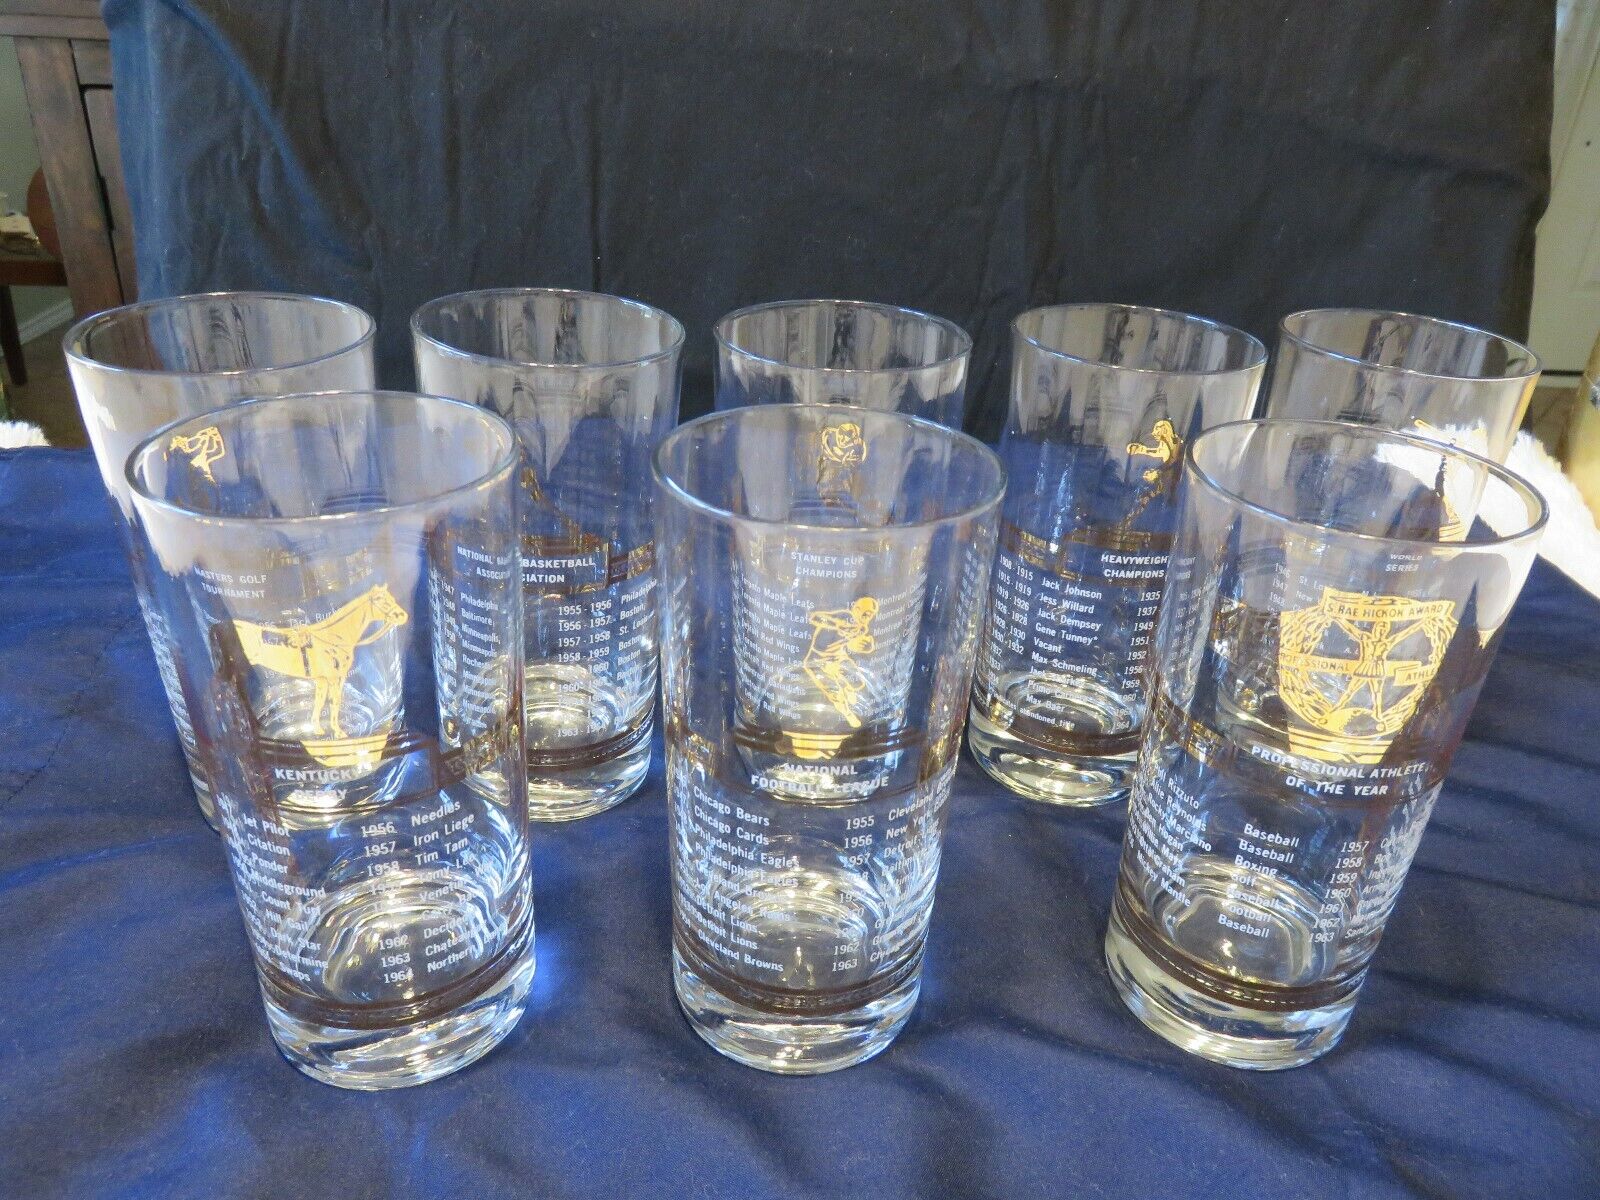 Collectors Vintage Sports glasses from the 1960s,wonderful condition,8 glass set